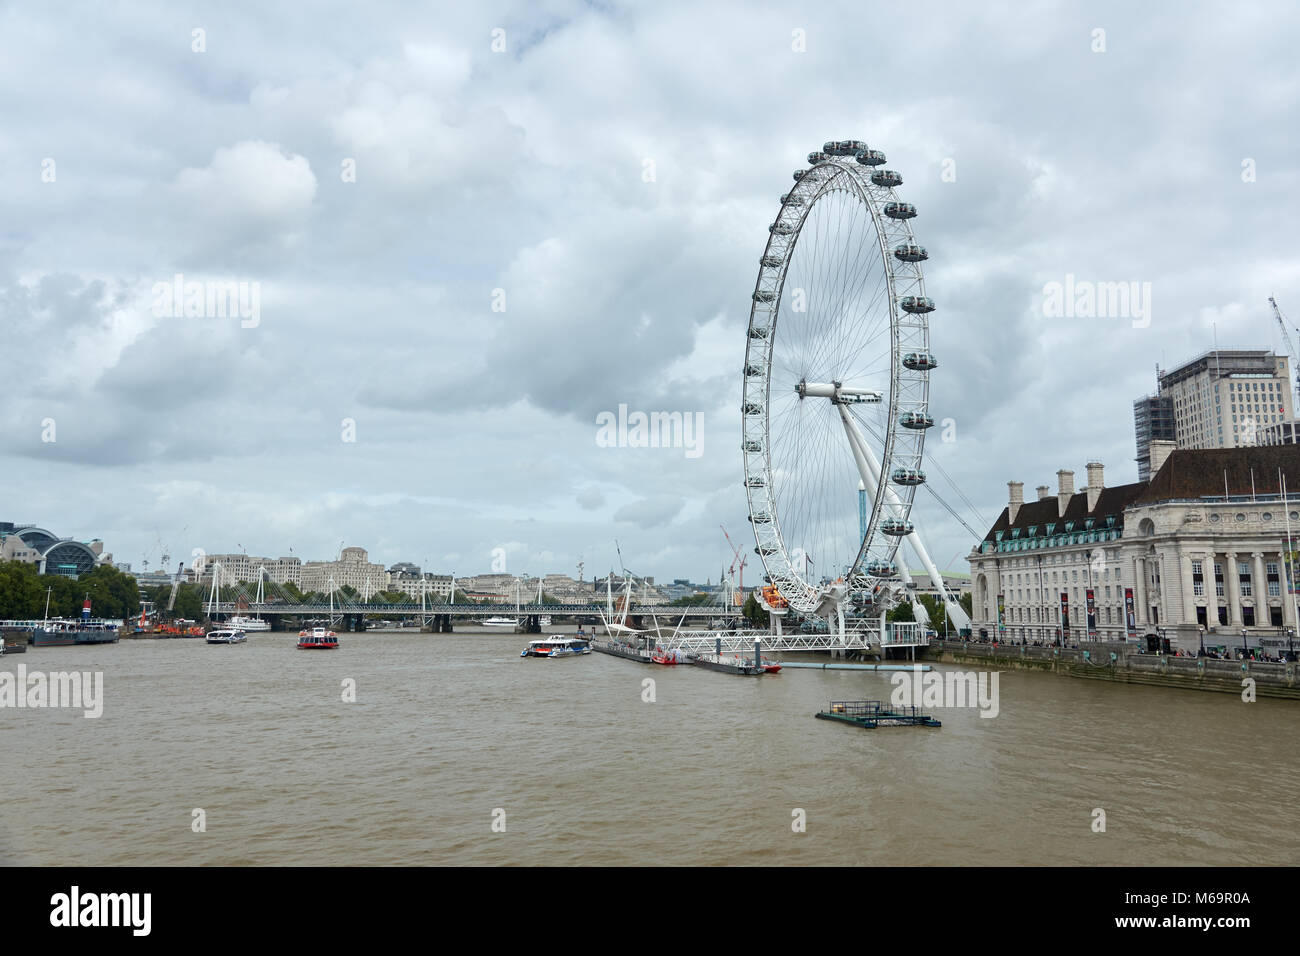 A large Ferris wheel. Sightseeing London's Eye. View from the bridge in cloudy weather. Stock Photo